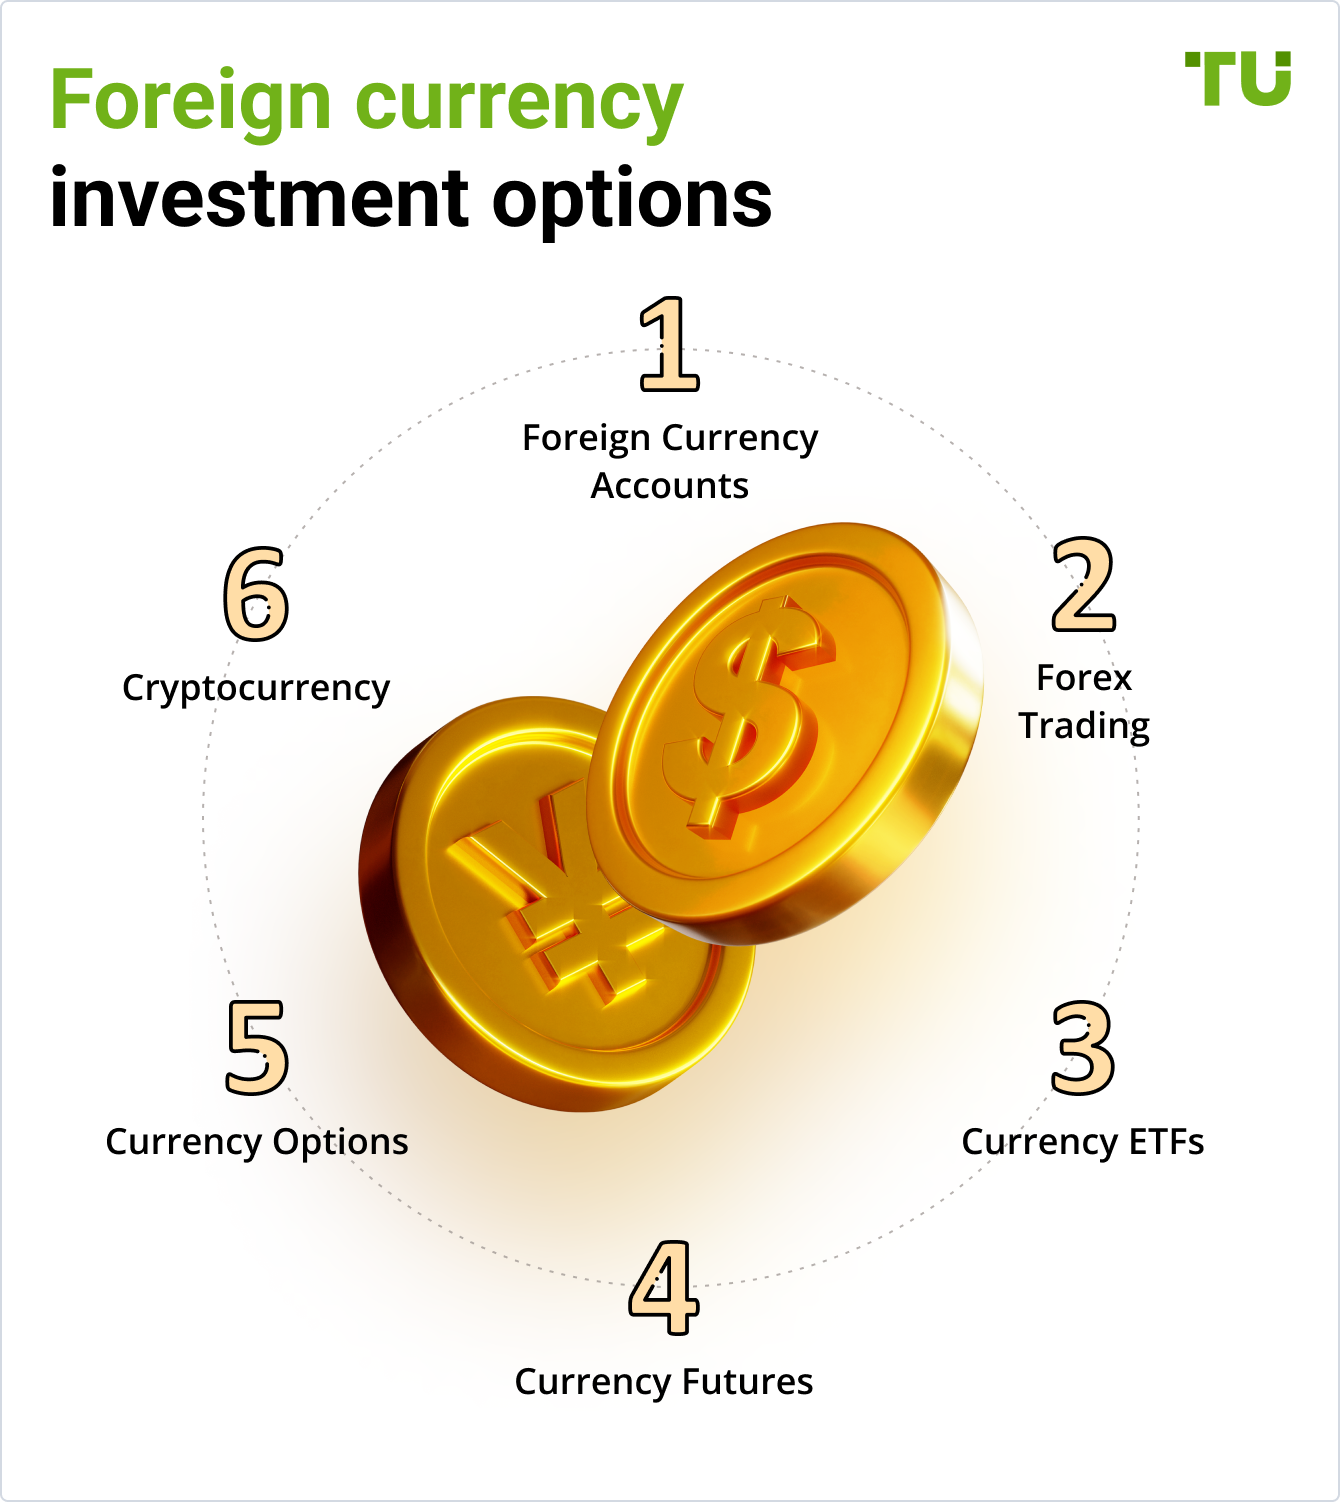 Foreign currency investment options